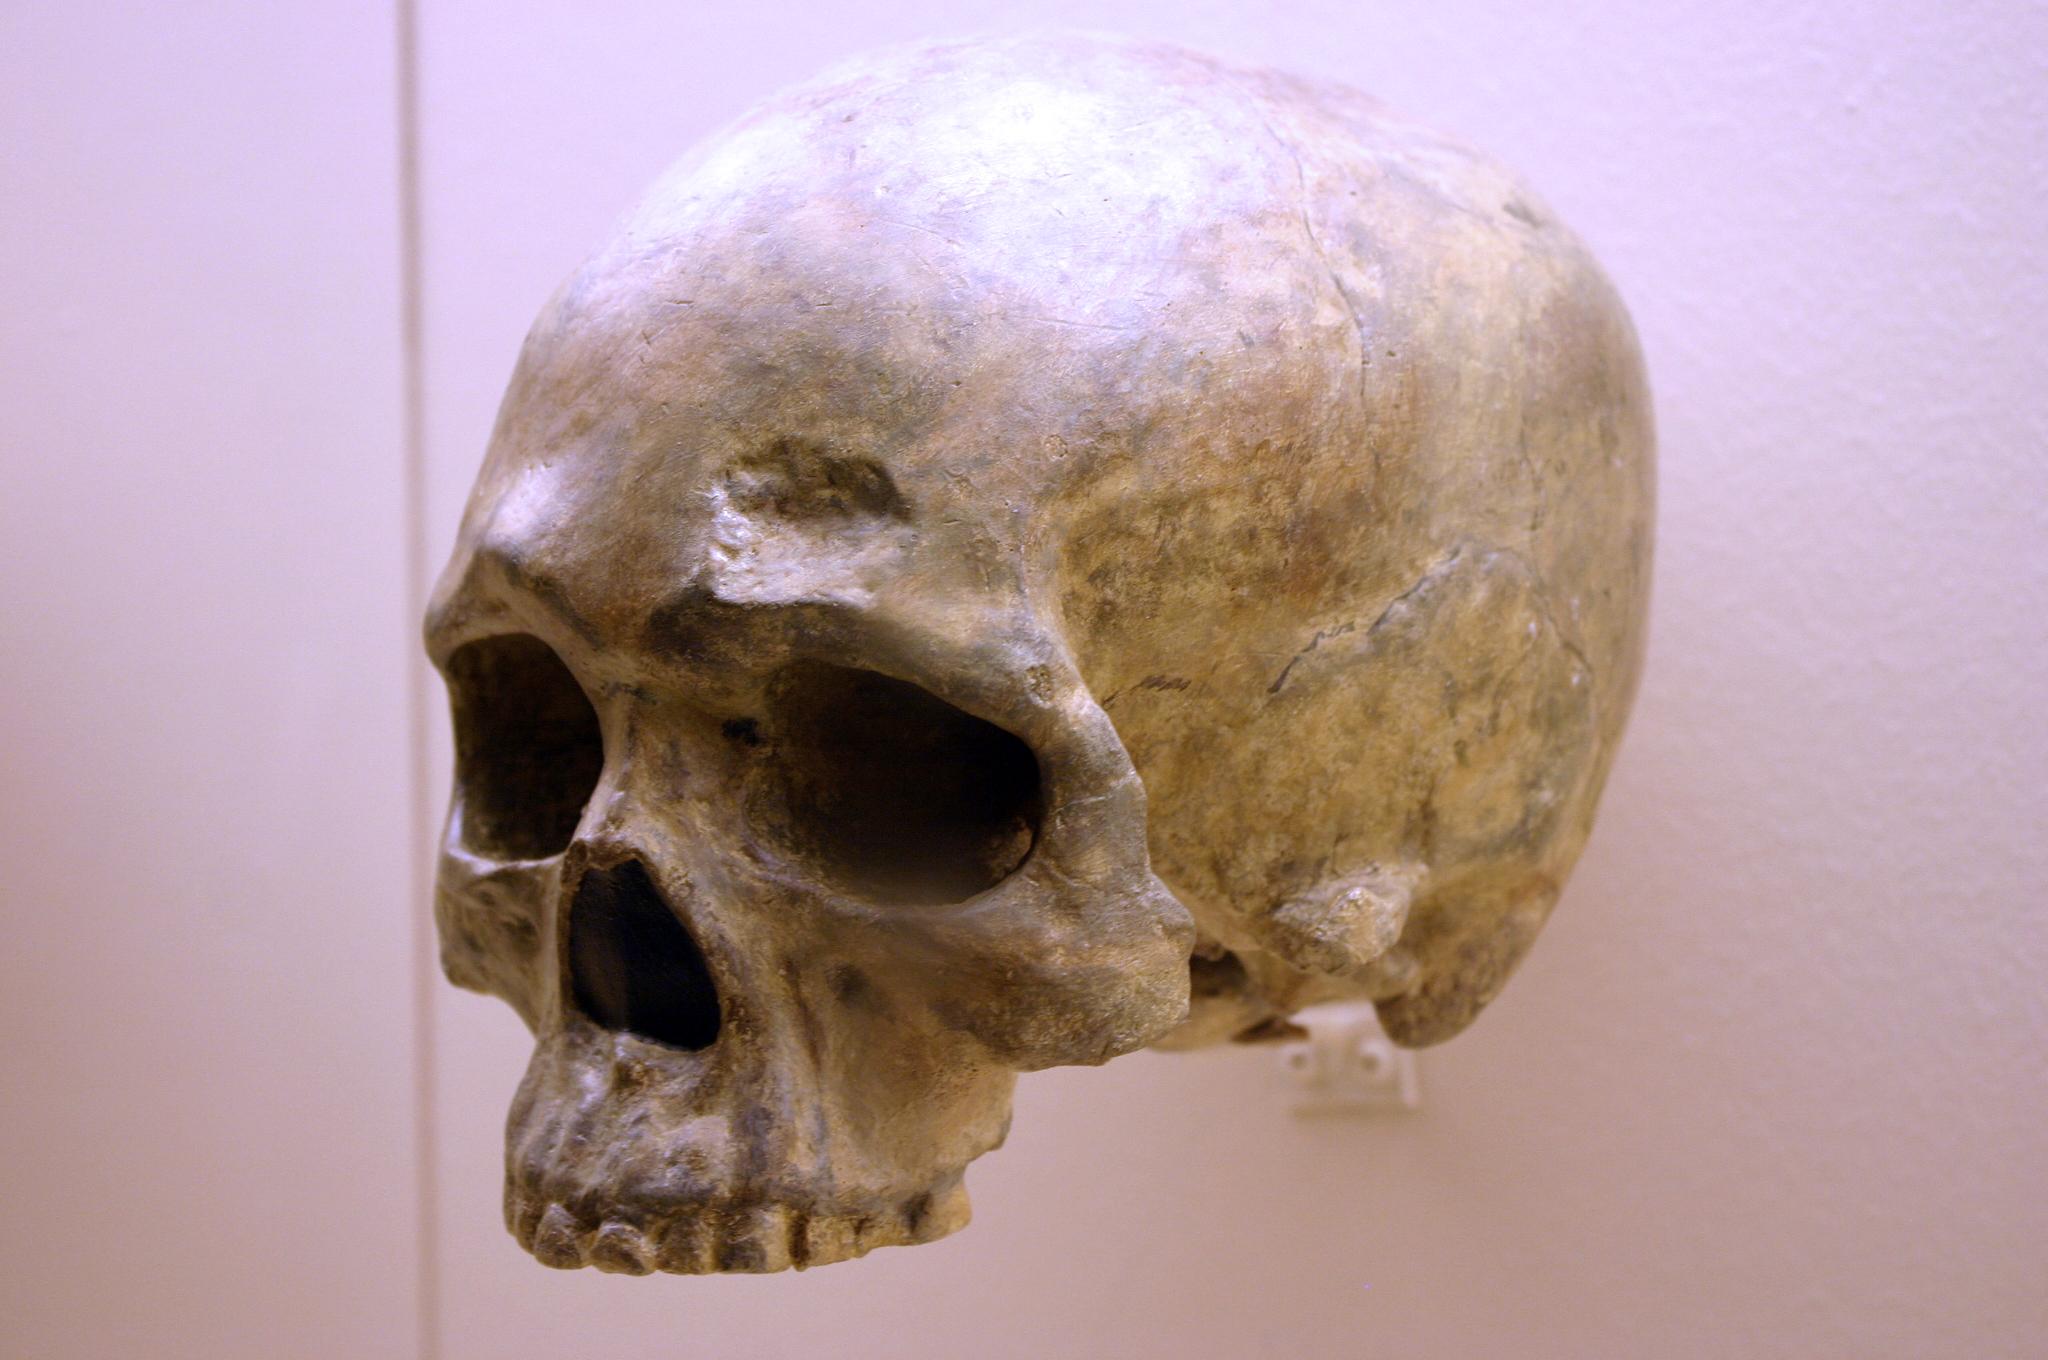 A human skull with very slight brow ridges and an extremely globular braincase.